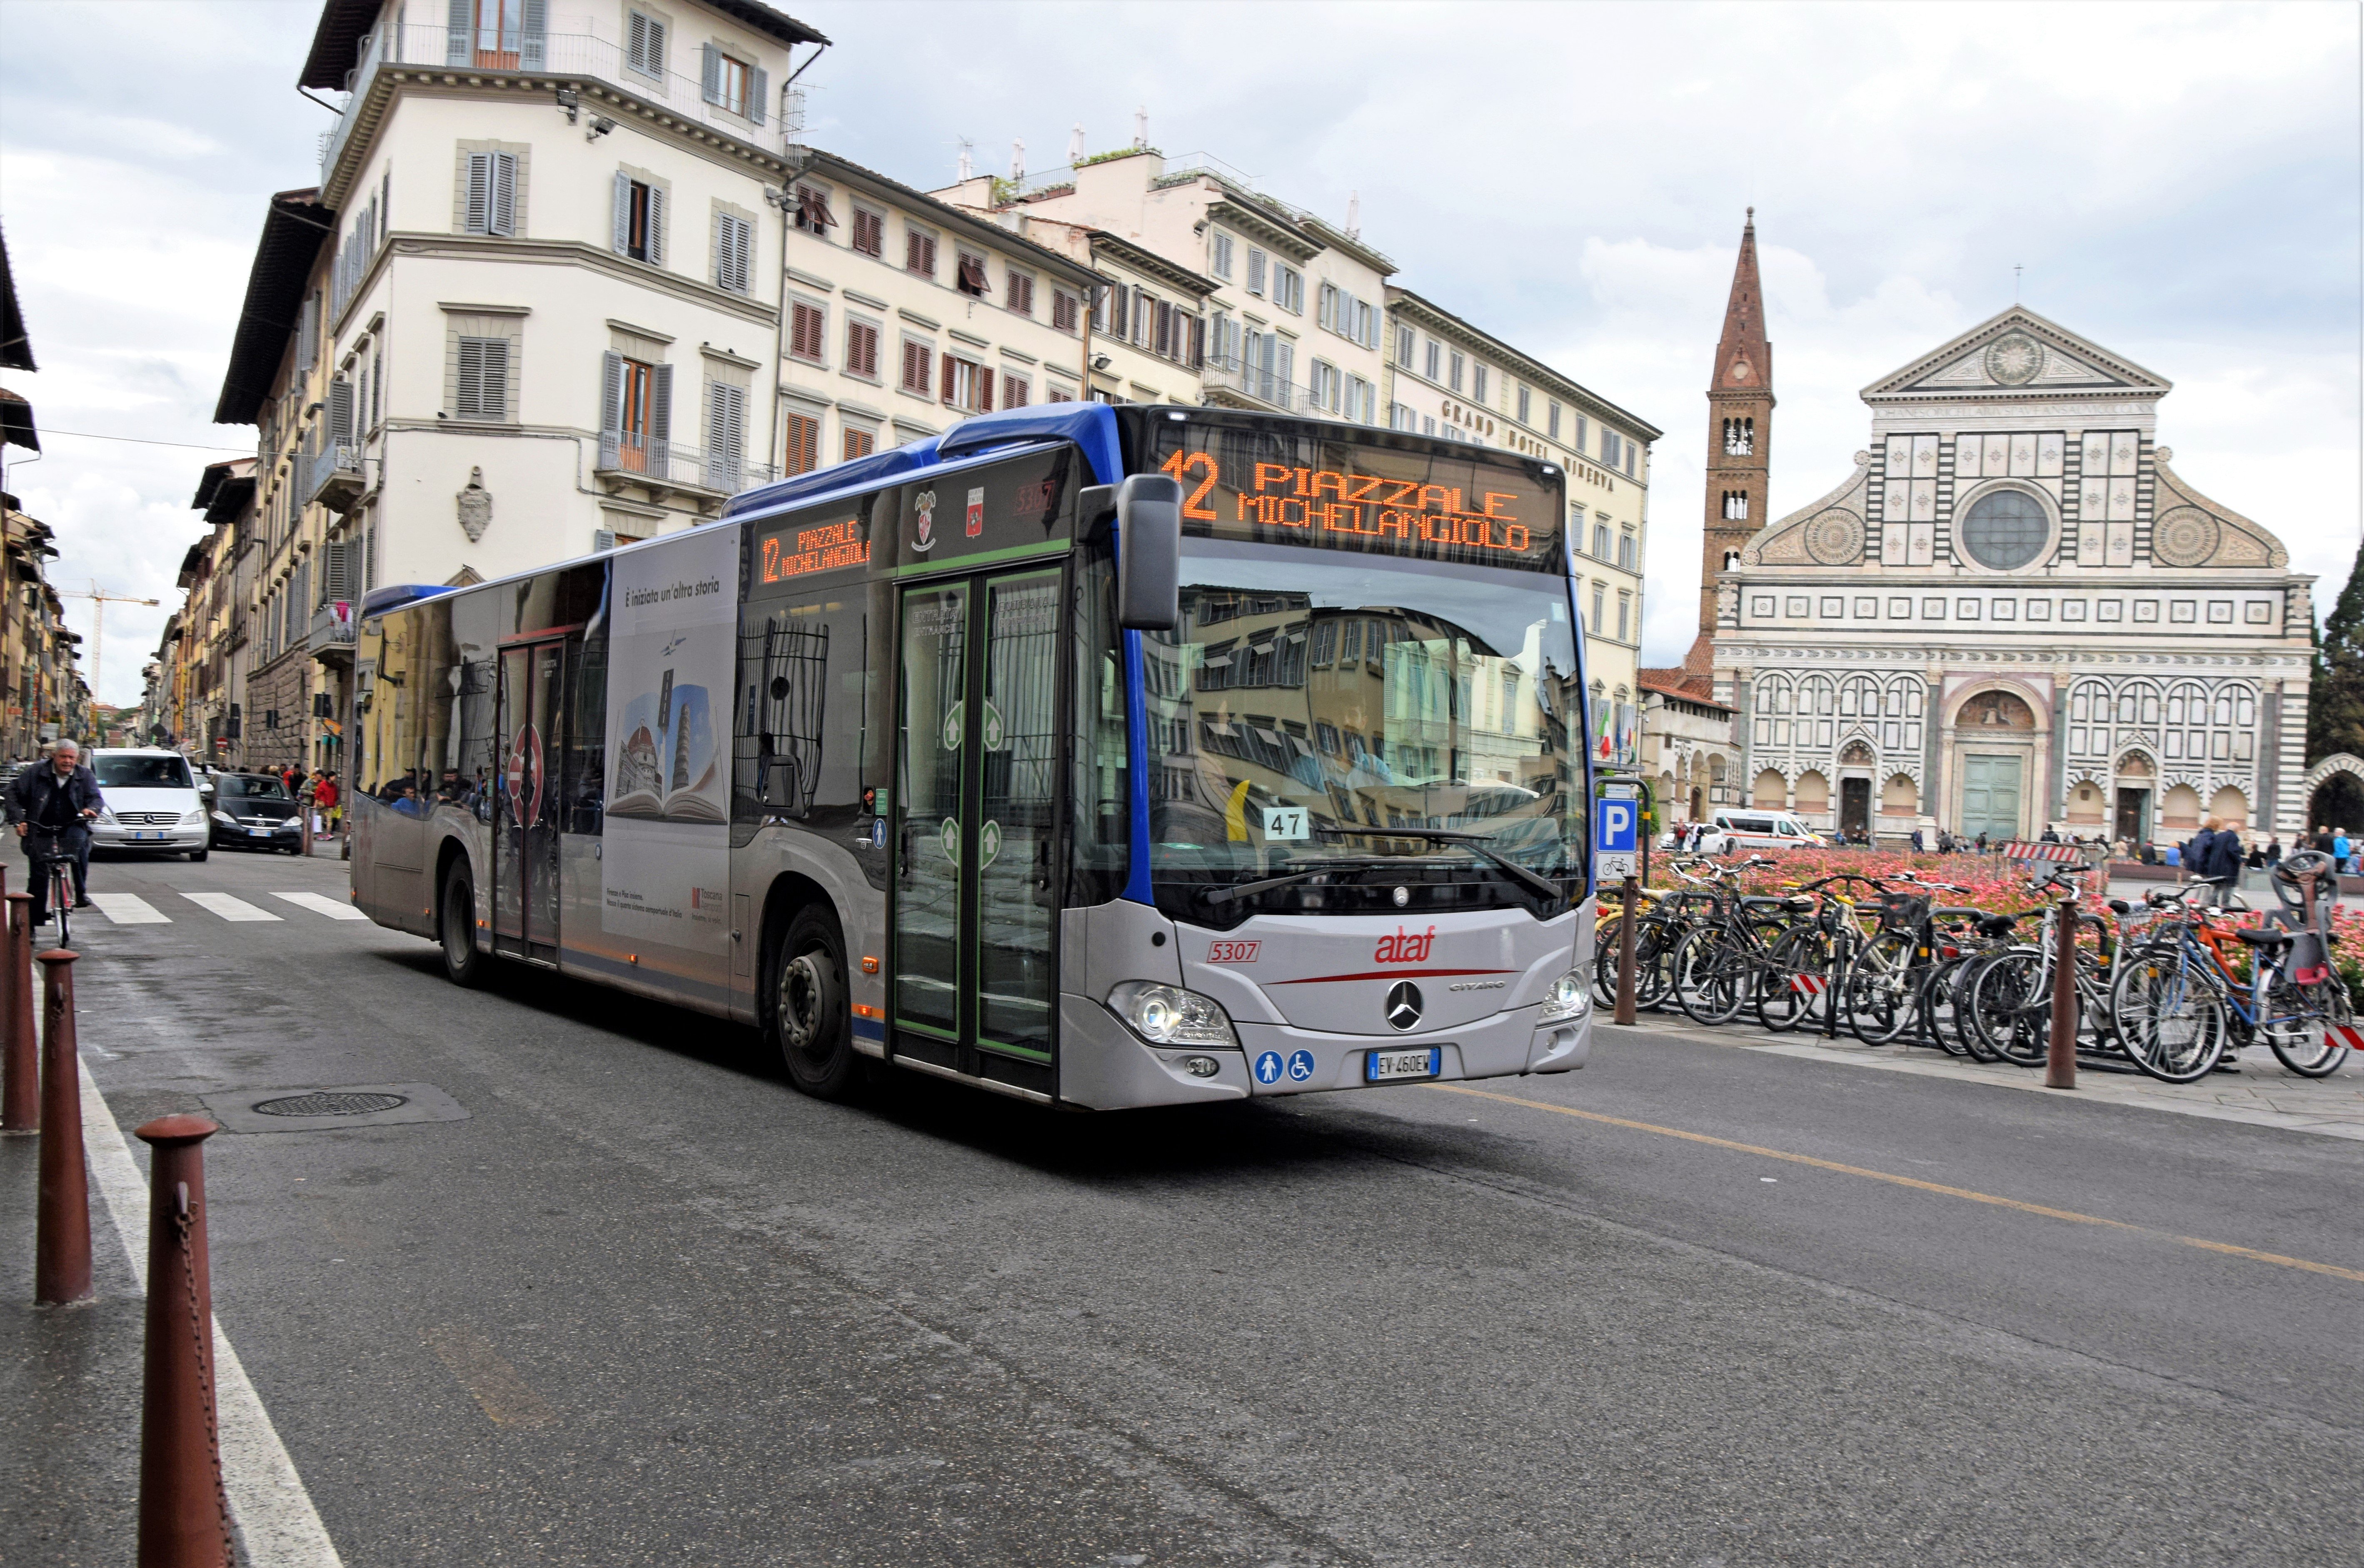 Low-floor-bus-on-the-street-in-Florence-629771578_5675x3765